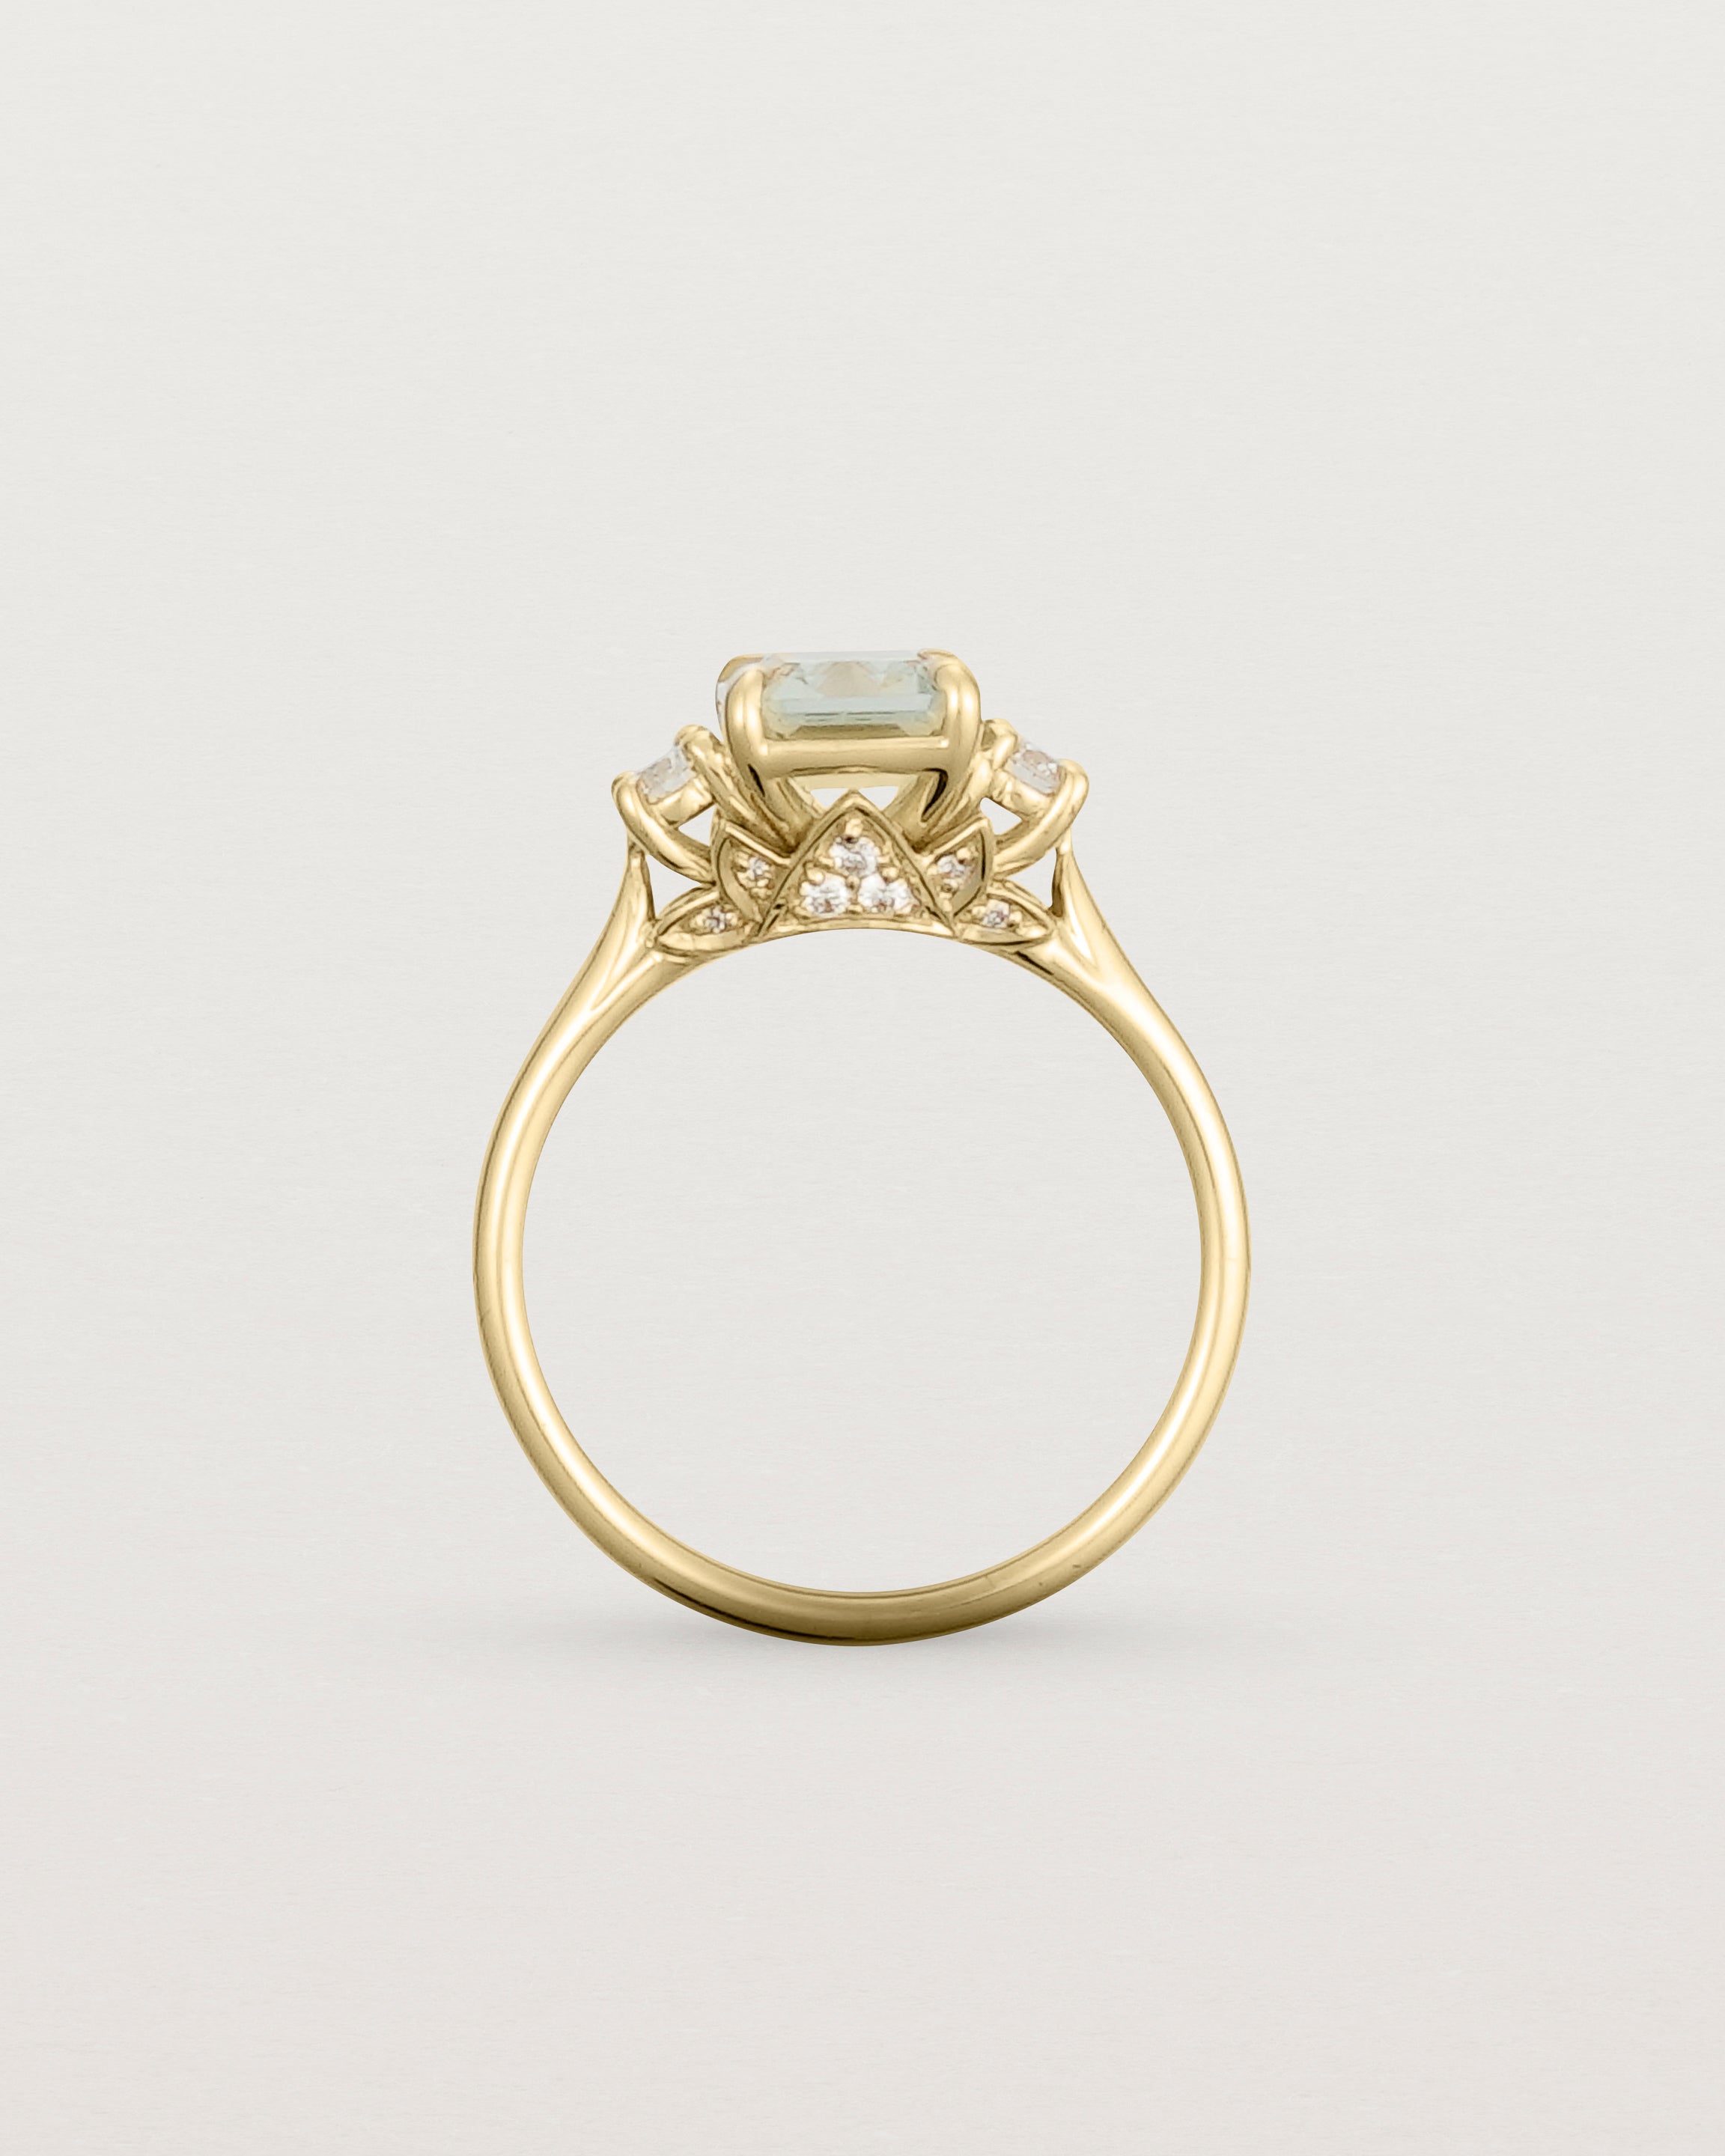 Standing view of the Laurel Emerald Trio Ring | Green Amethyst | Yellow Gold.